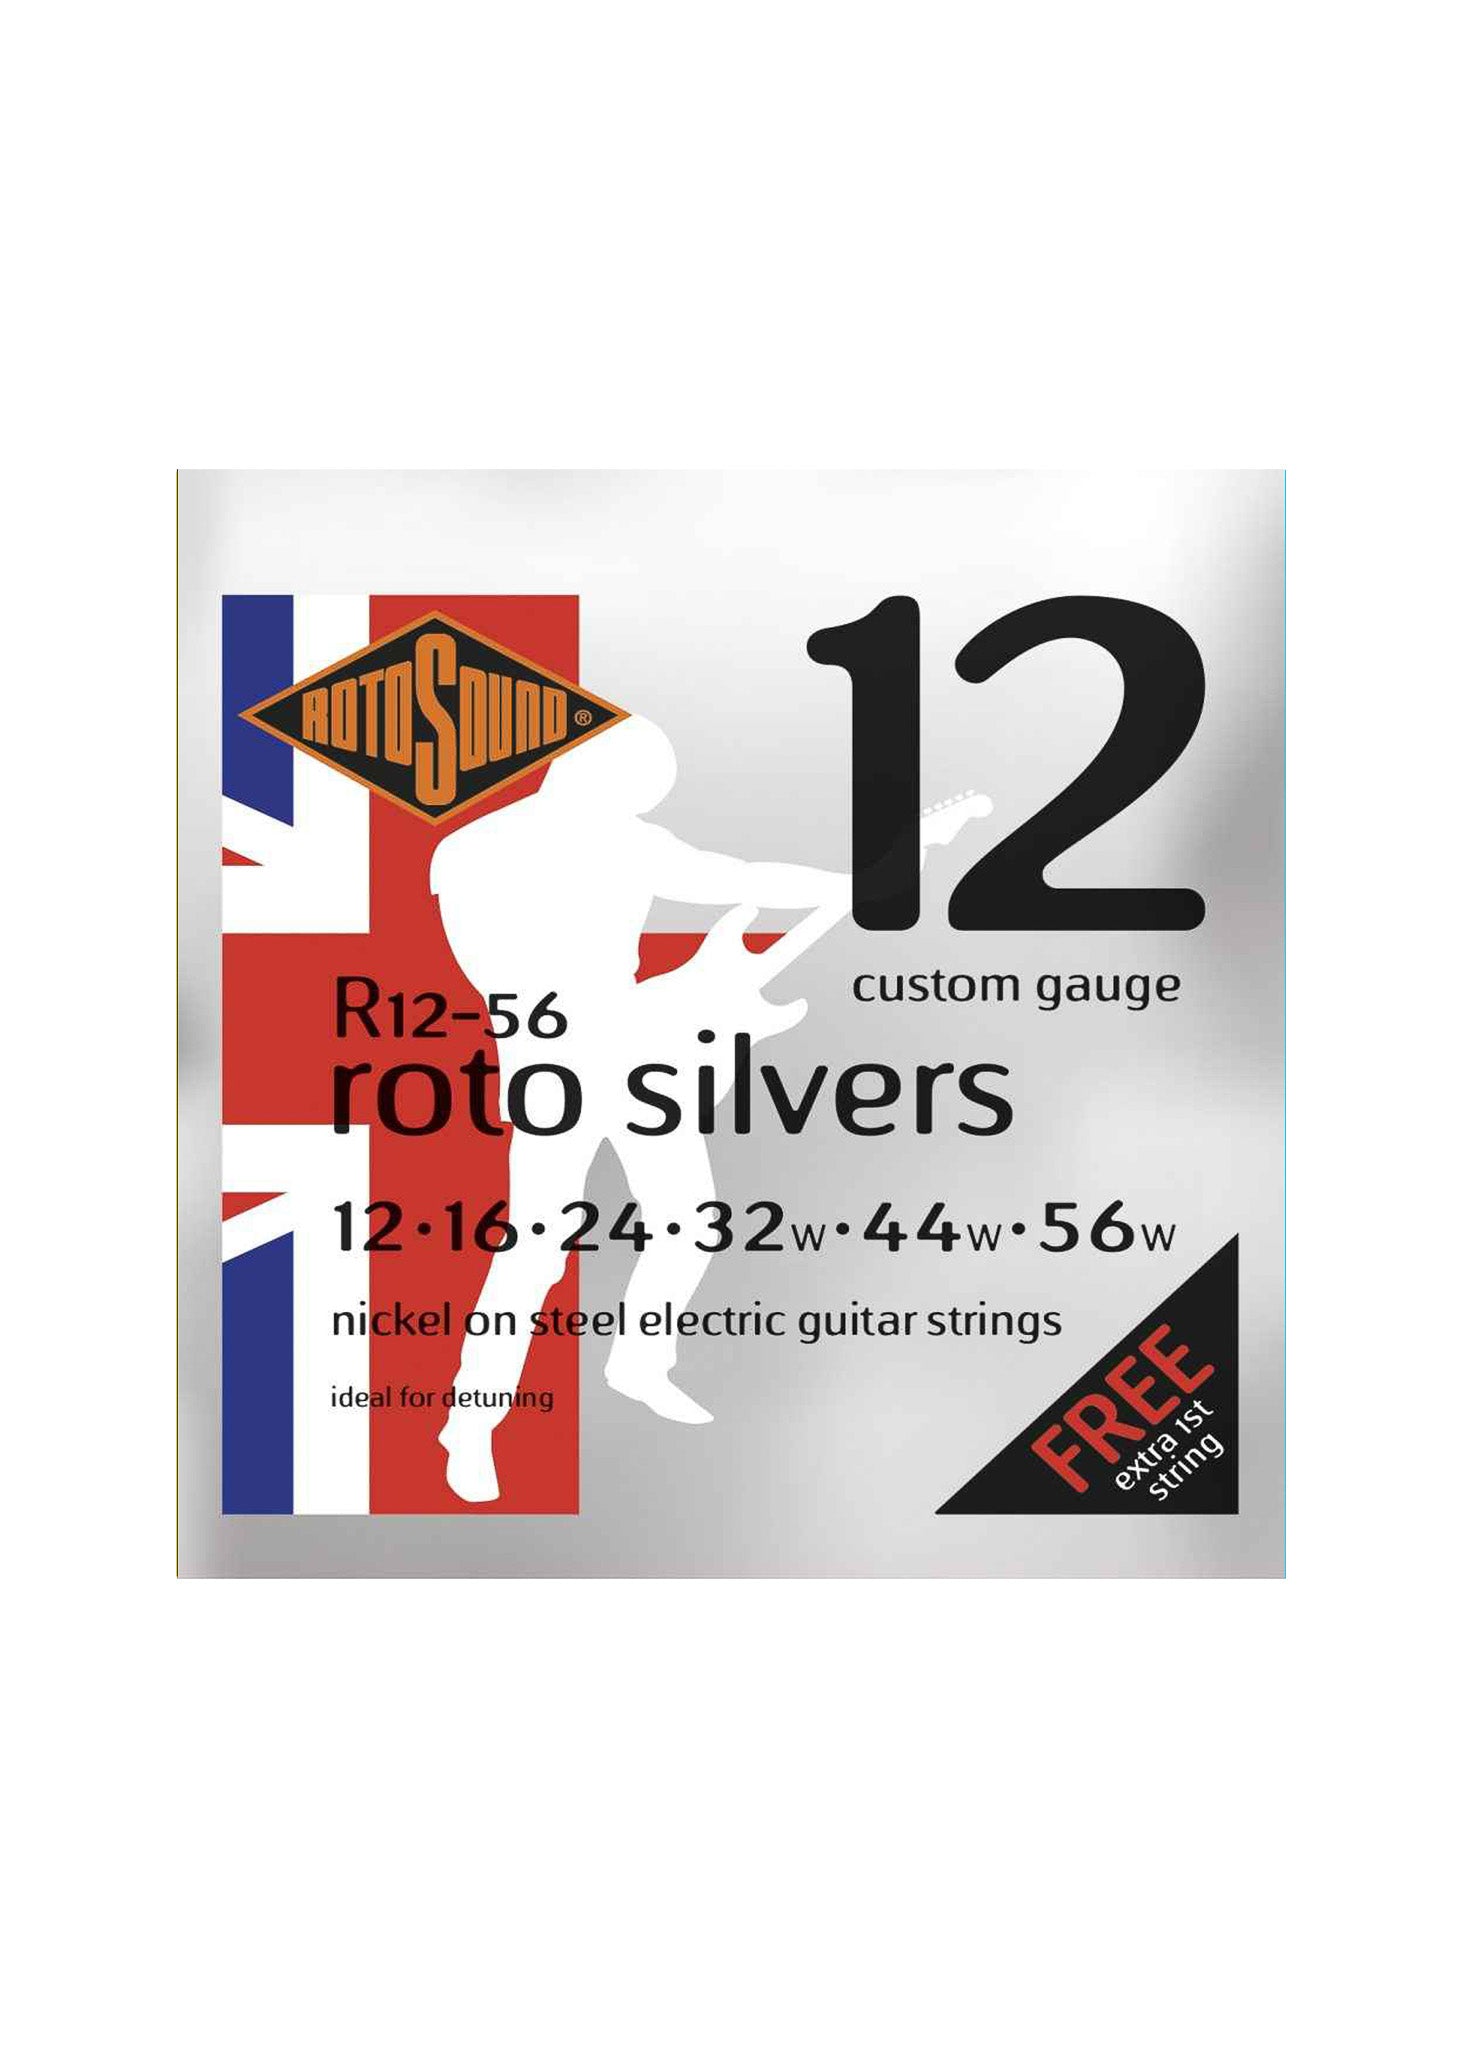 Rotosound R12-56 Roto Silver Nickel On Steel Electric Guitar Strings - .012-.056 Detuning